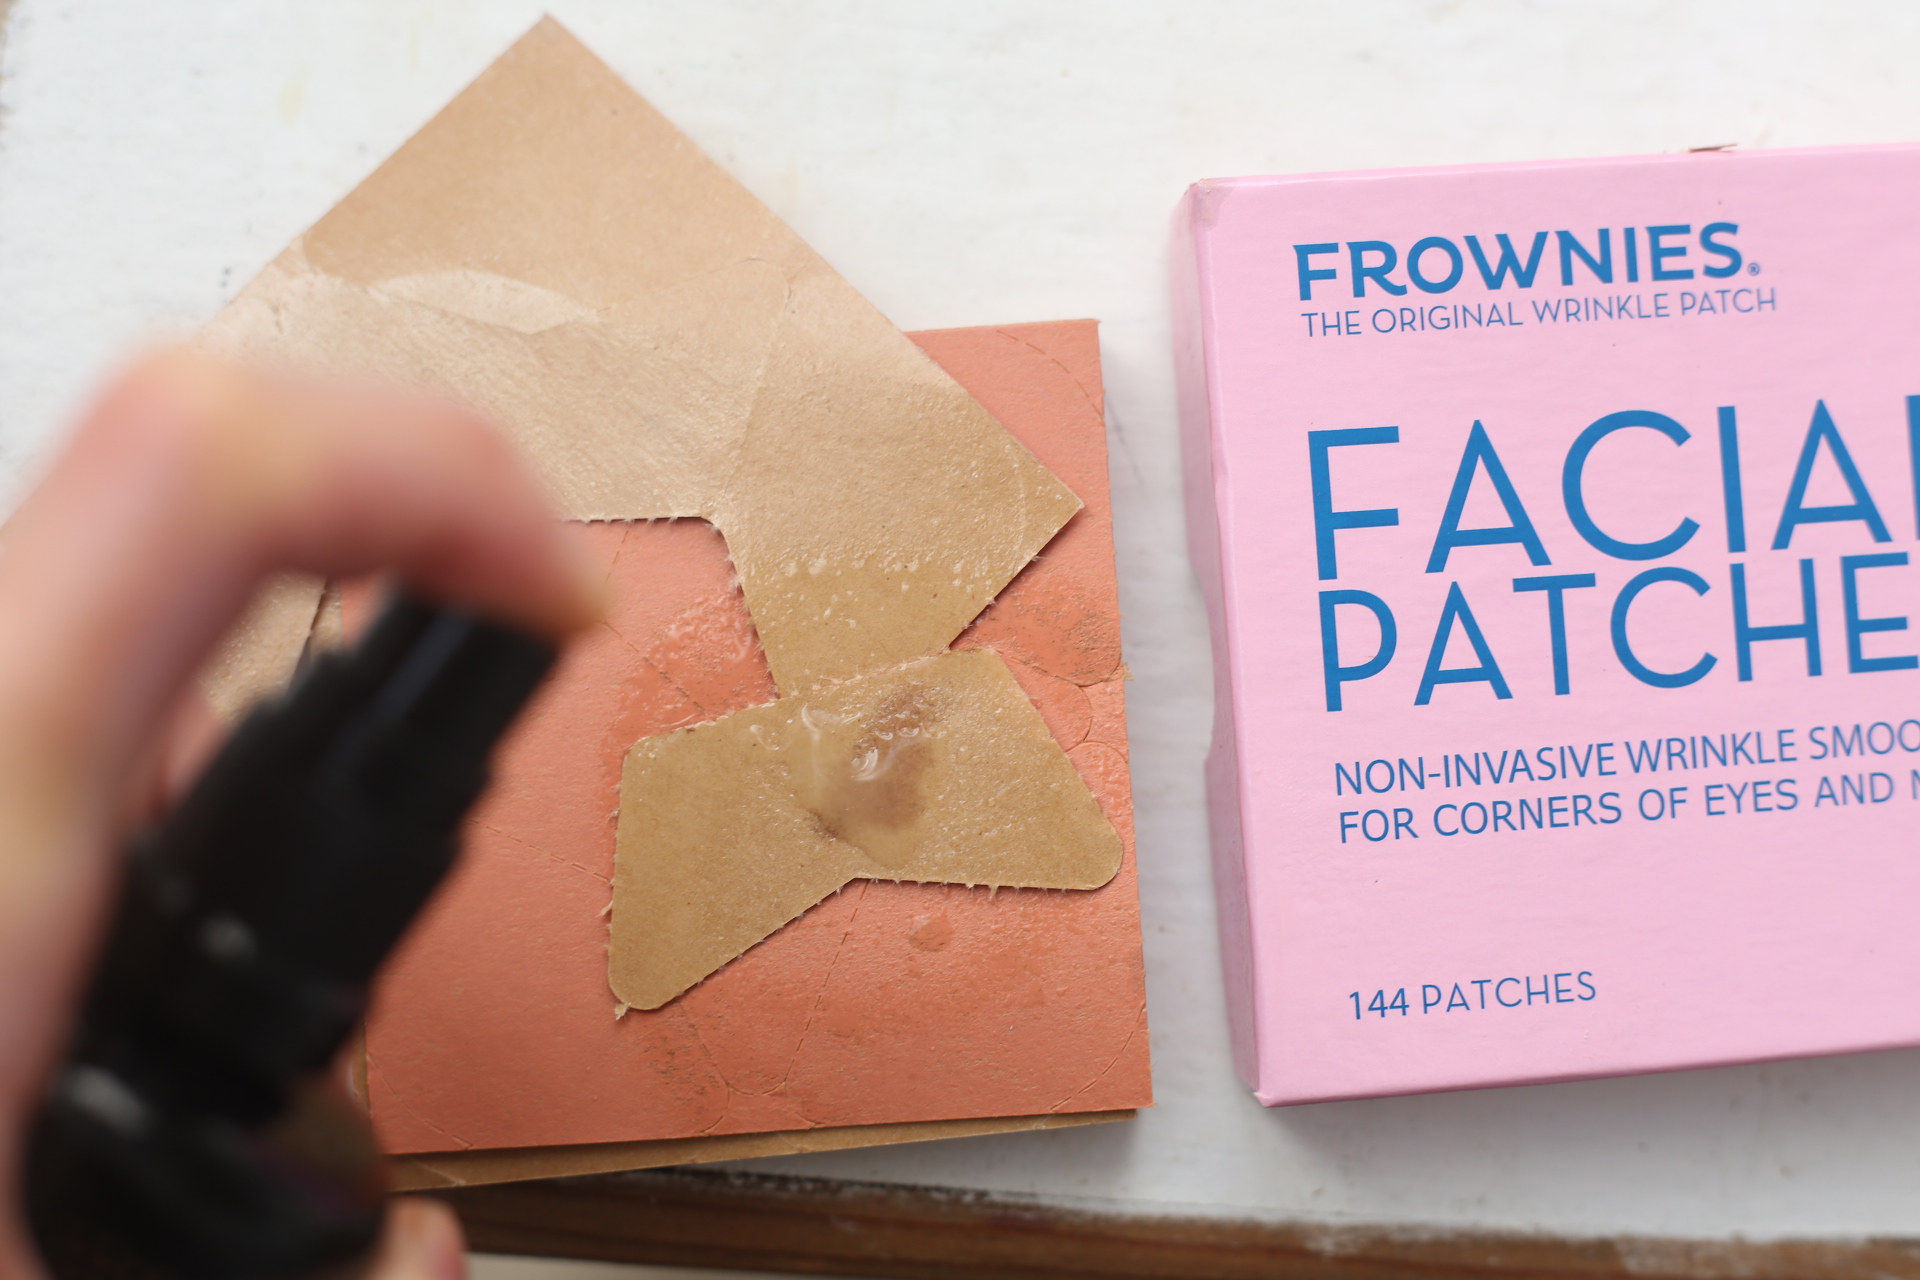 Frownies wrinkle patches